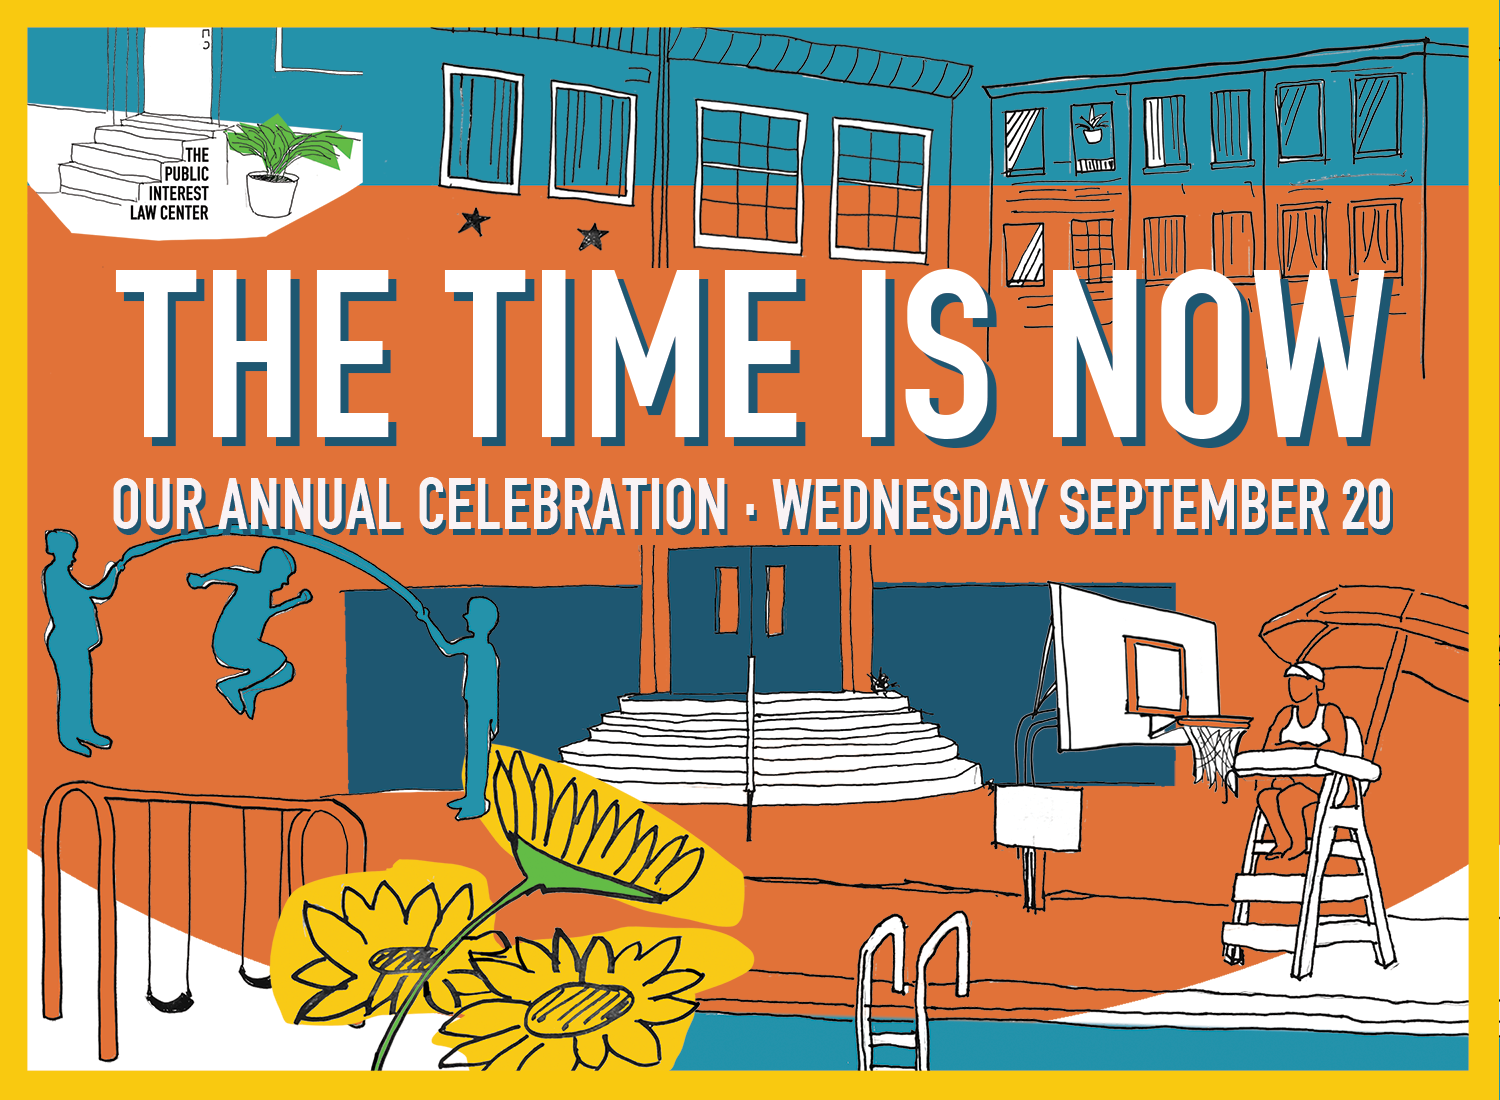 The Time is Now. Annual Celebration, Wednesday, September 20. An illustration of Philadelphia school yards and rowhomes